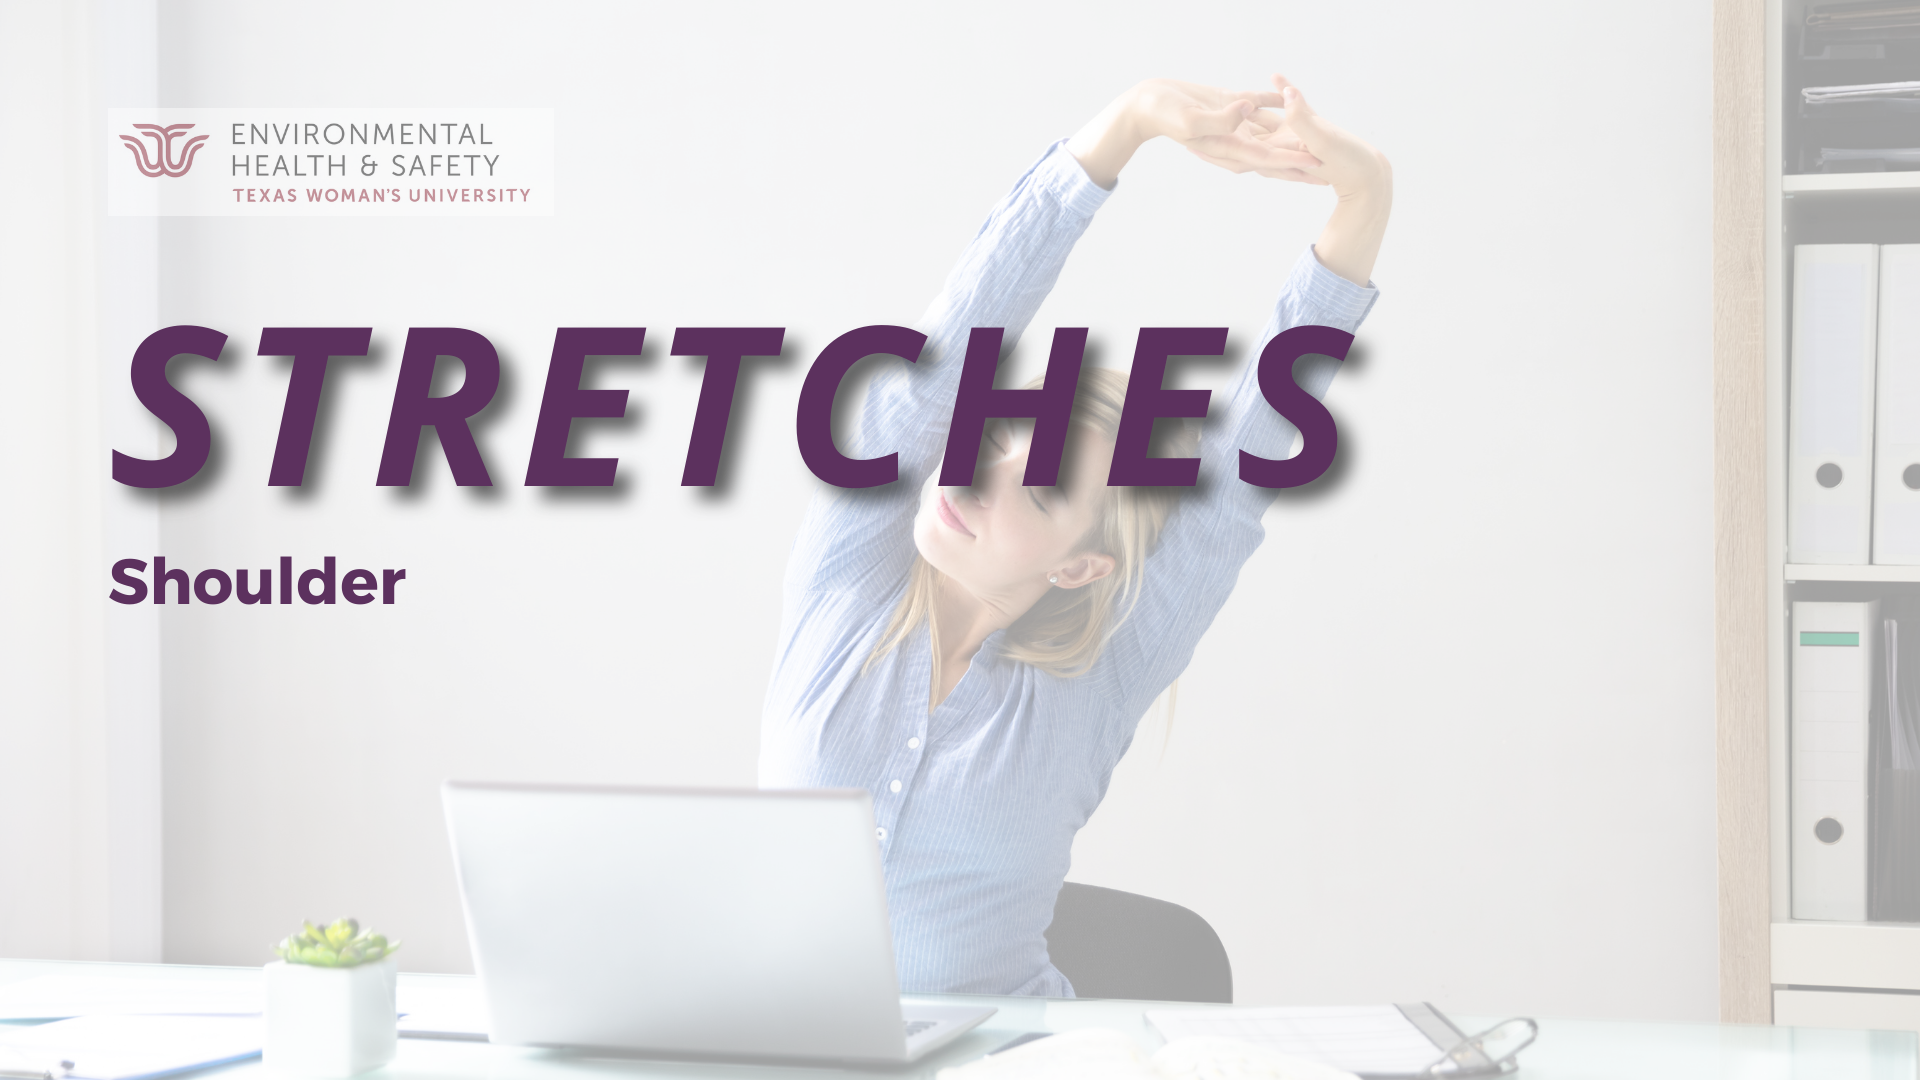 Background is a photo of a woman in a blue shirt sitting at a desk with a laptop and stretching with her arms overhead. In the foreground is text that says "Stretches: Shoulder" and has the TWU Environmental Health and Safety logo